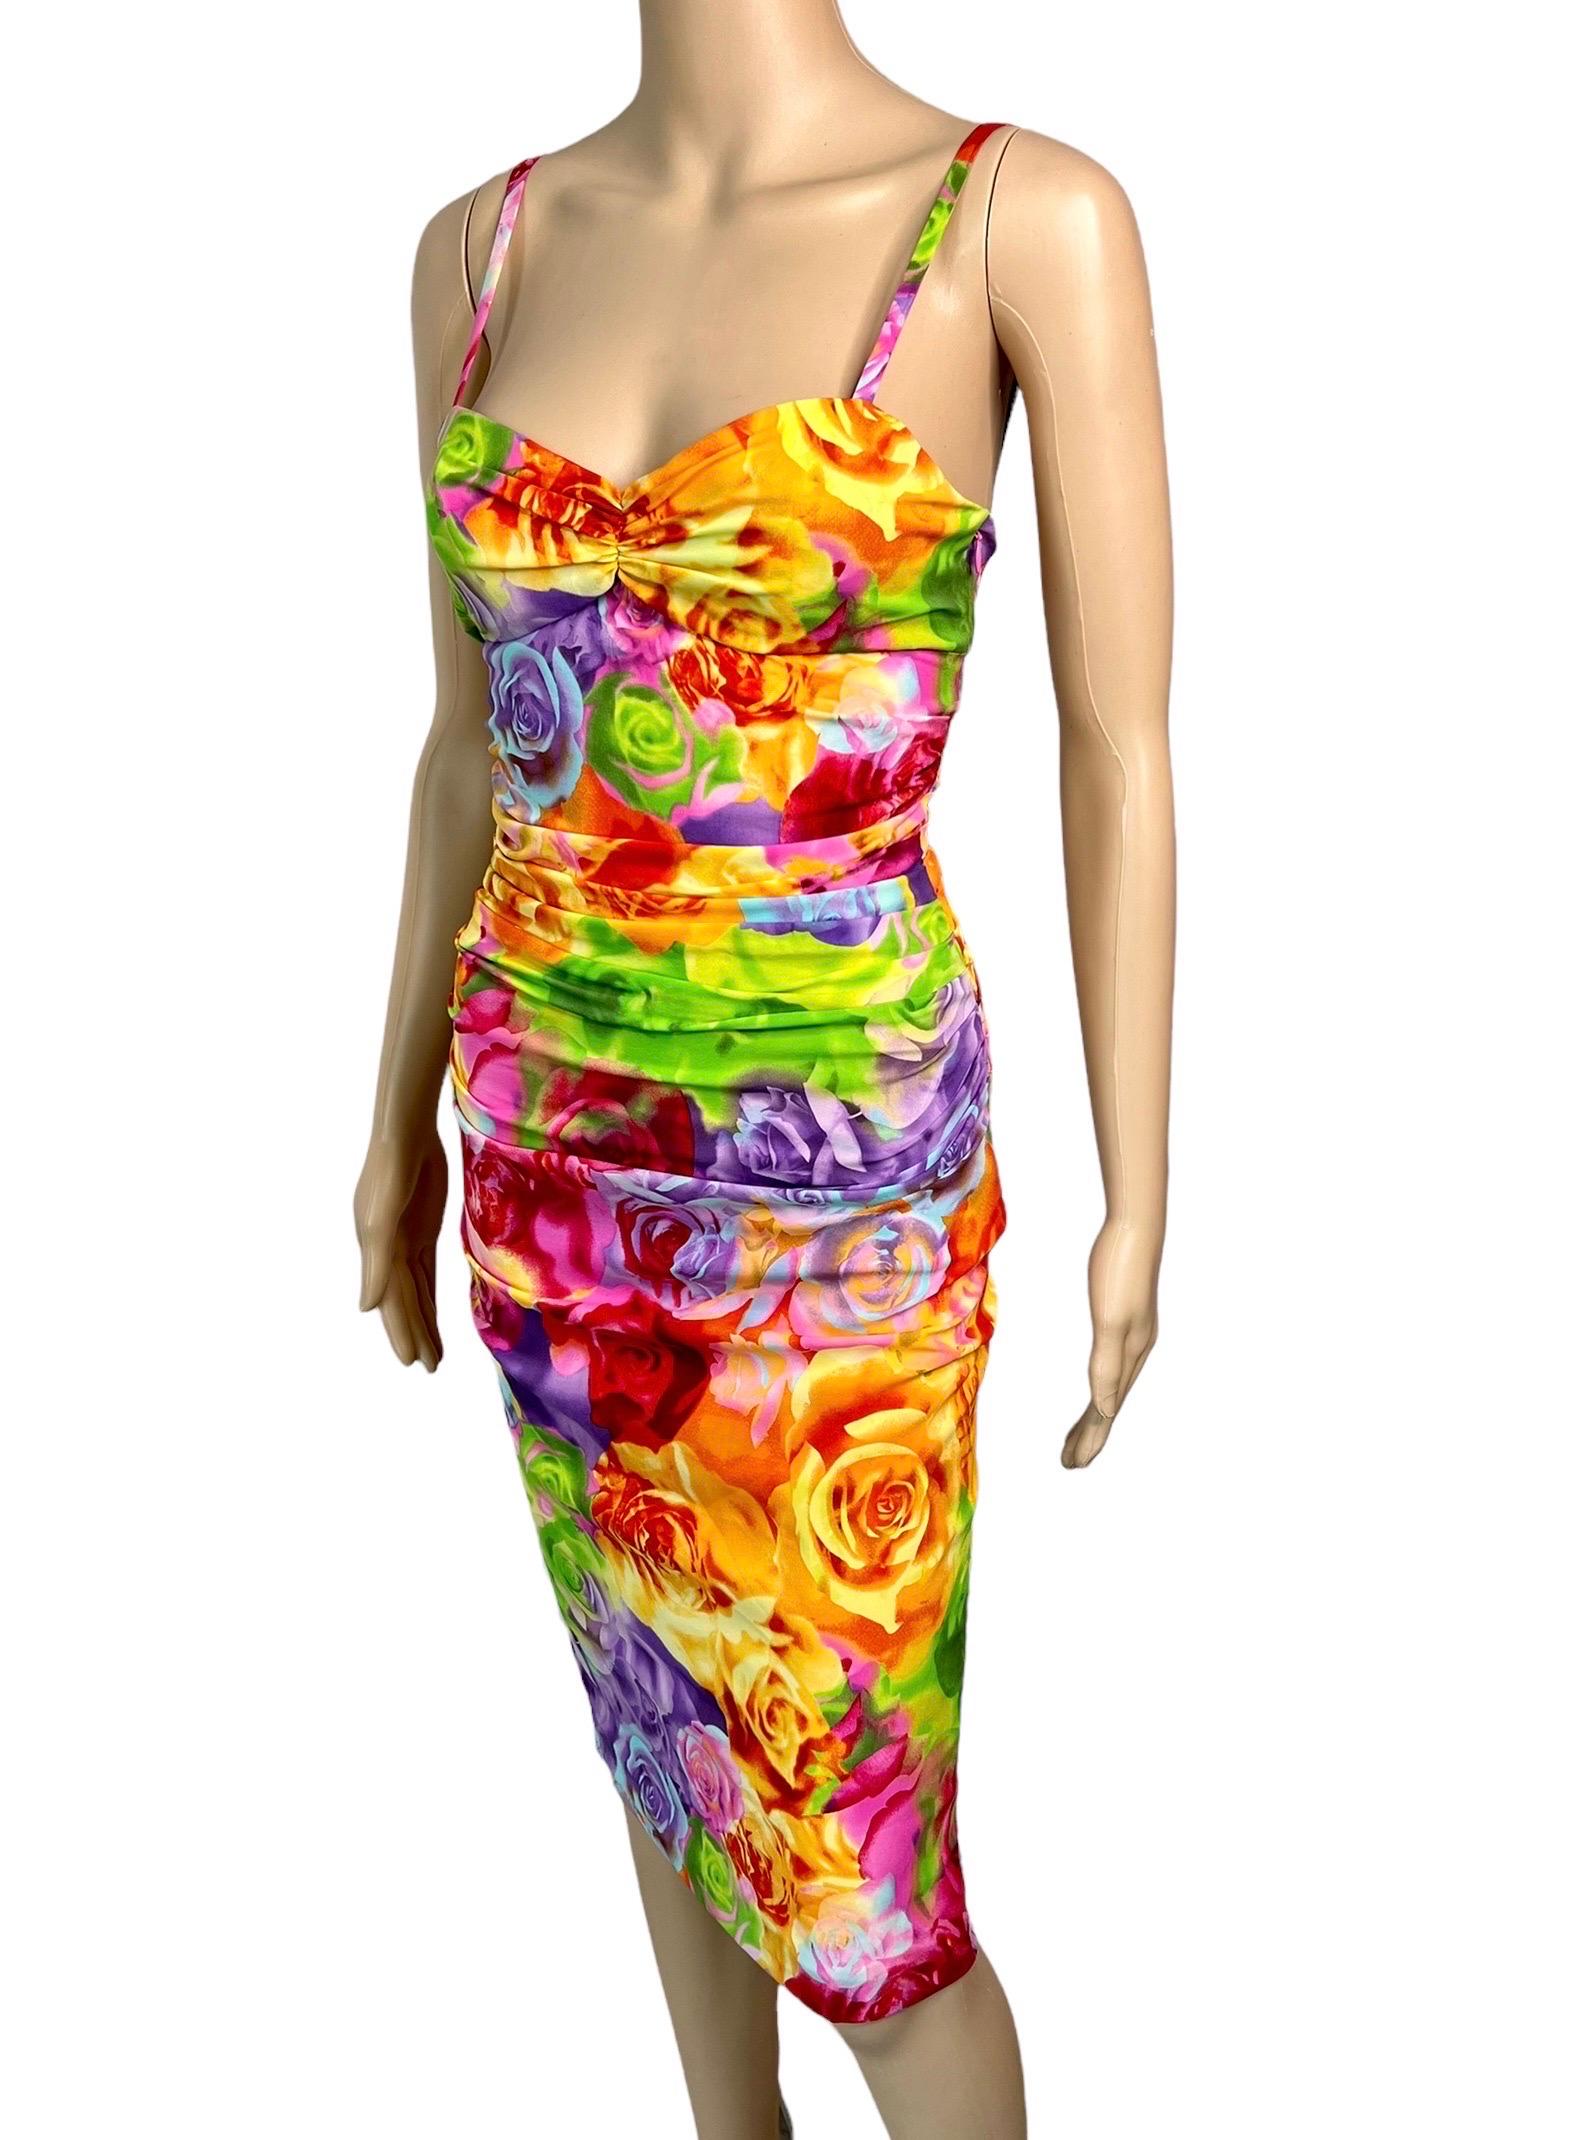 Versace S/S 2005 Bustier Bra Floral Print Bodycon Ruched Dress For Sale 6